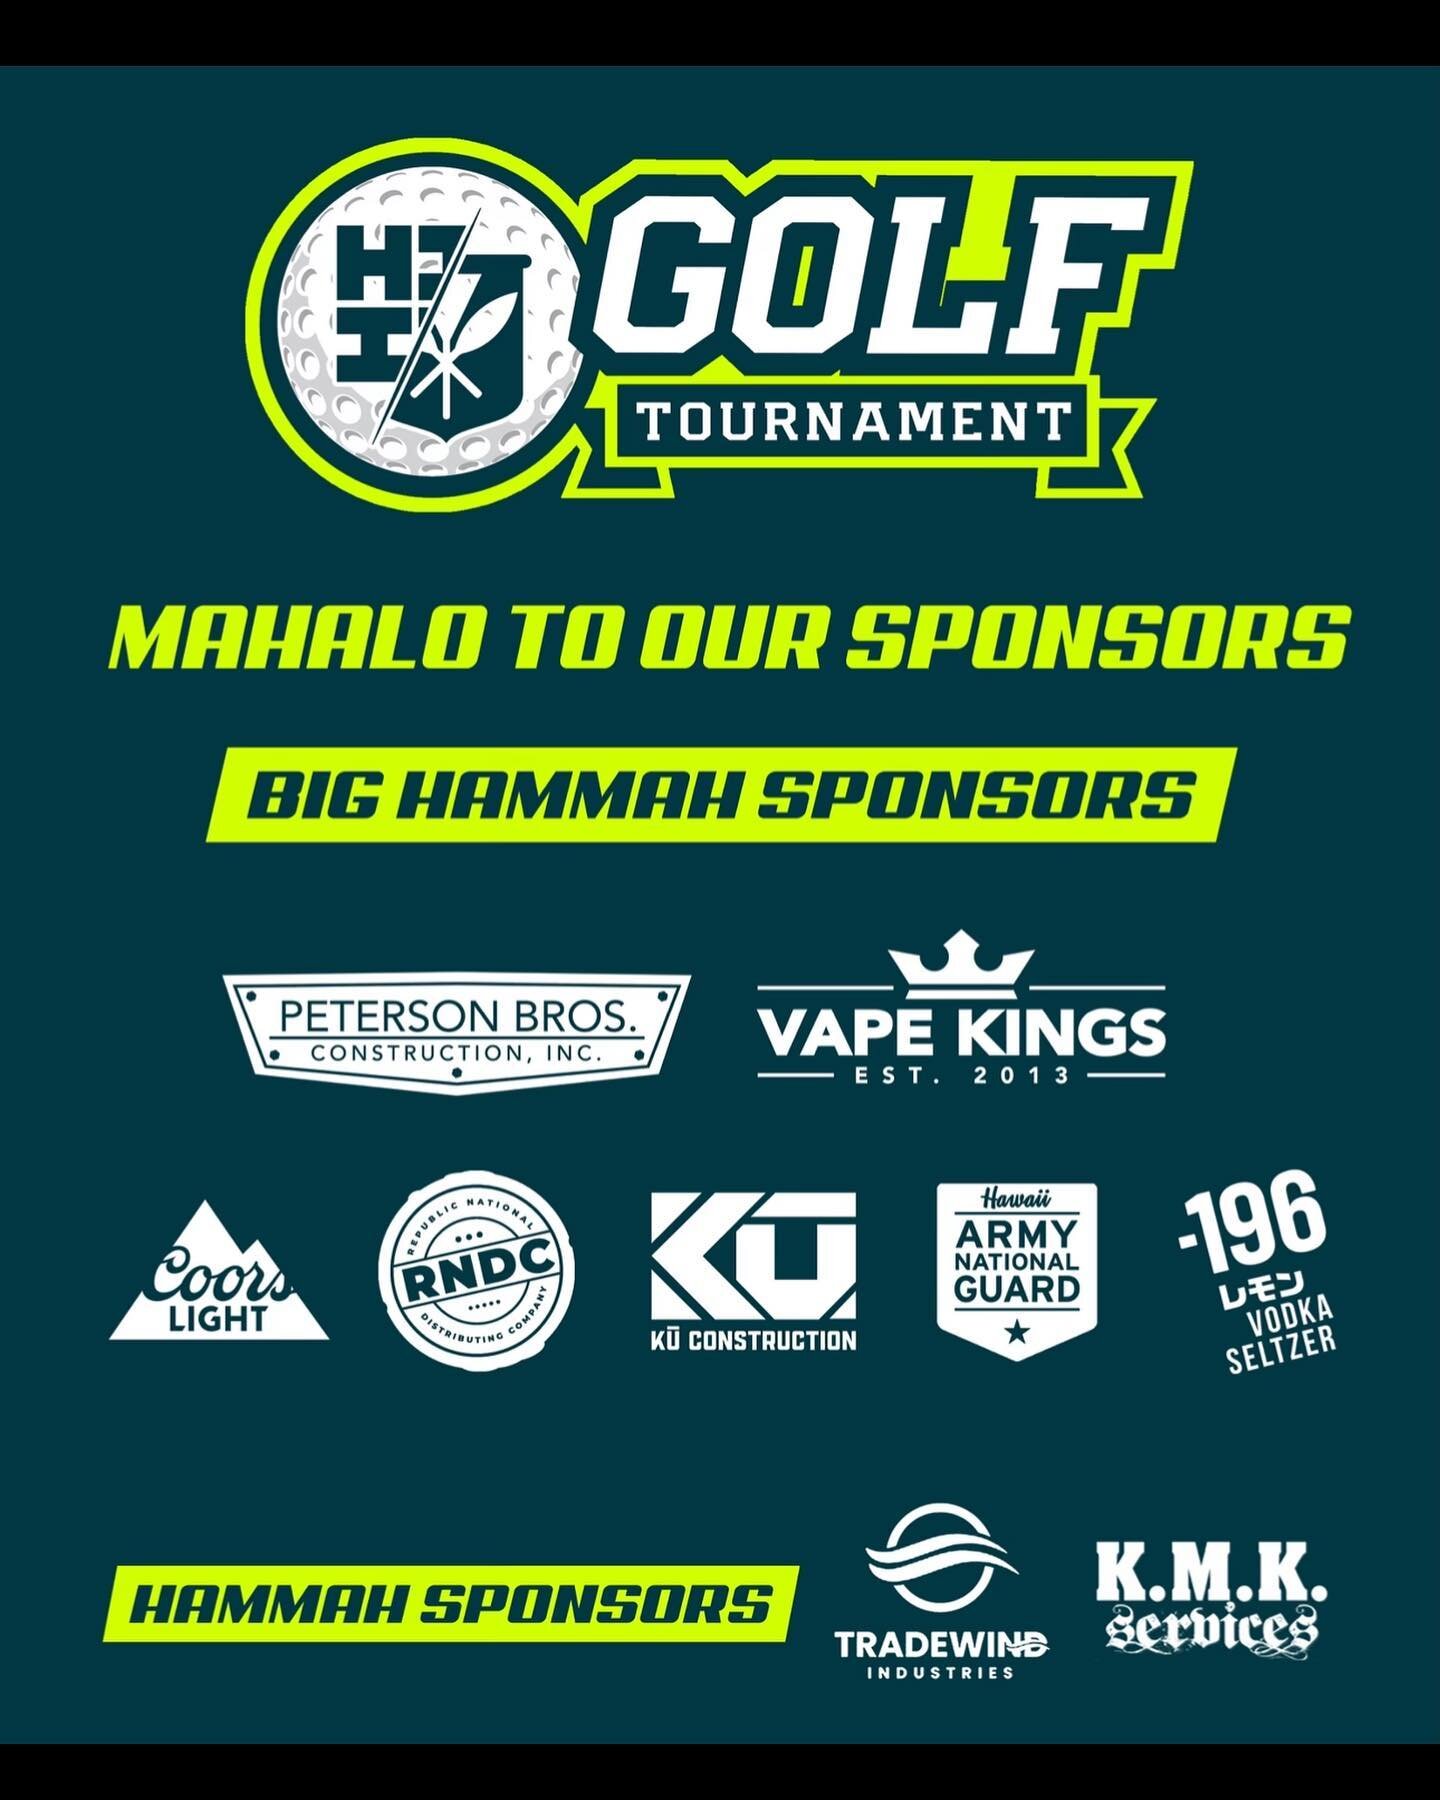 🚨We Are Officially Sold Out🚨
*
Looking forward to seeing everyone tomorrow at the 2nd Annual Hawaii&rsquo;s Finest Golf Tournament at Kapolei Golf Course. Mahalo to all the teams, organizers and sponsors! 
*
Swipe to see more info for Tomorrow. #HI